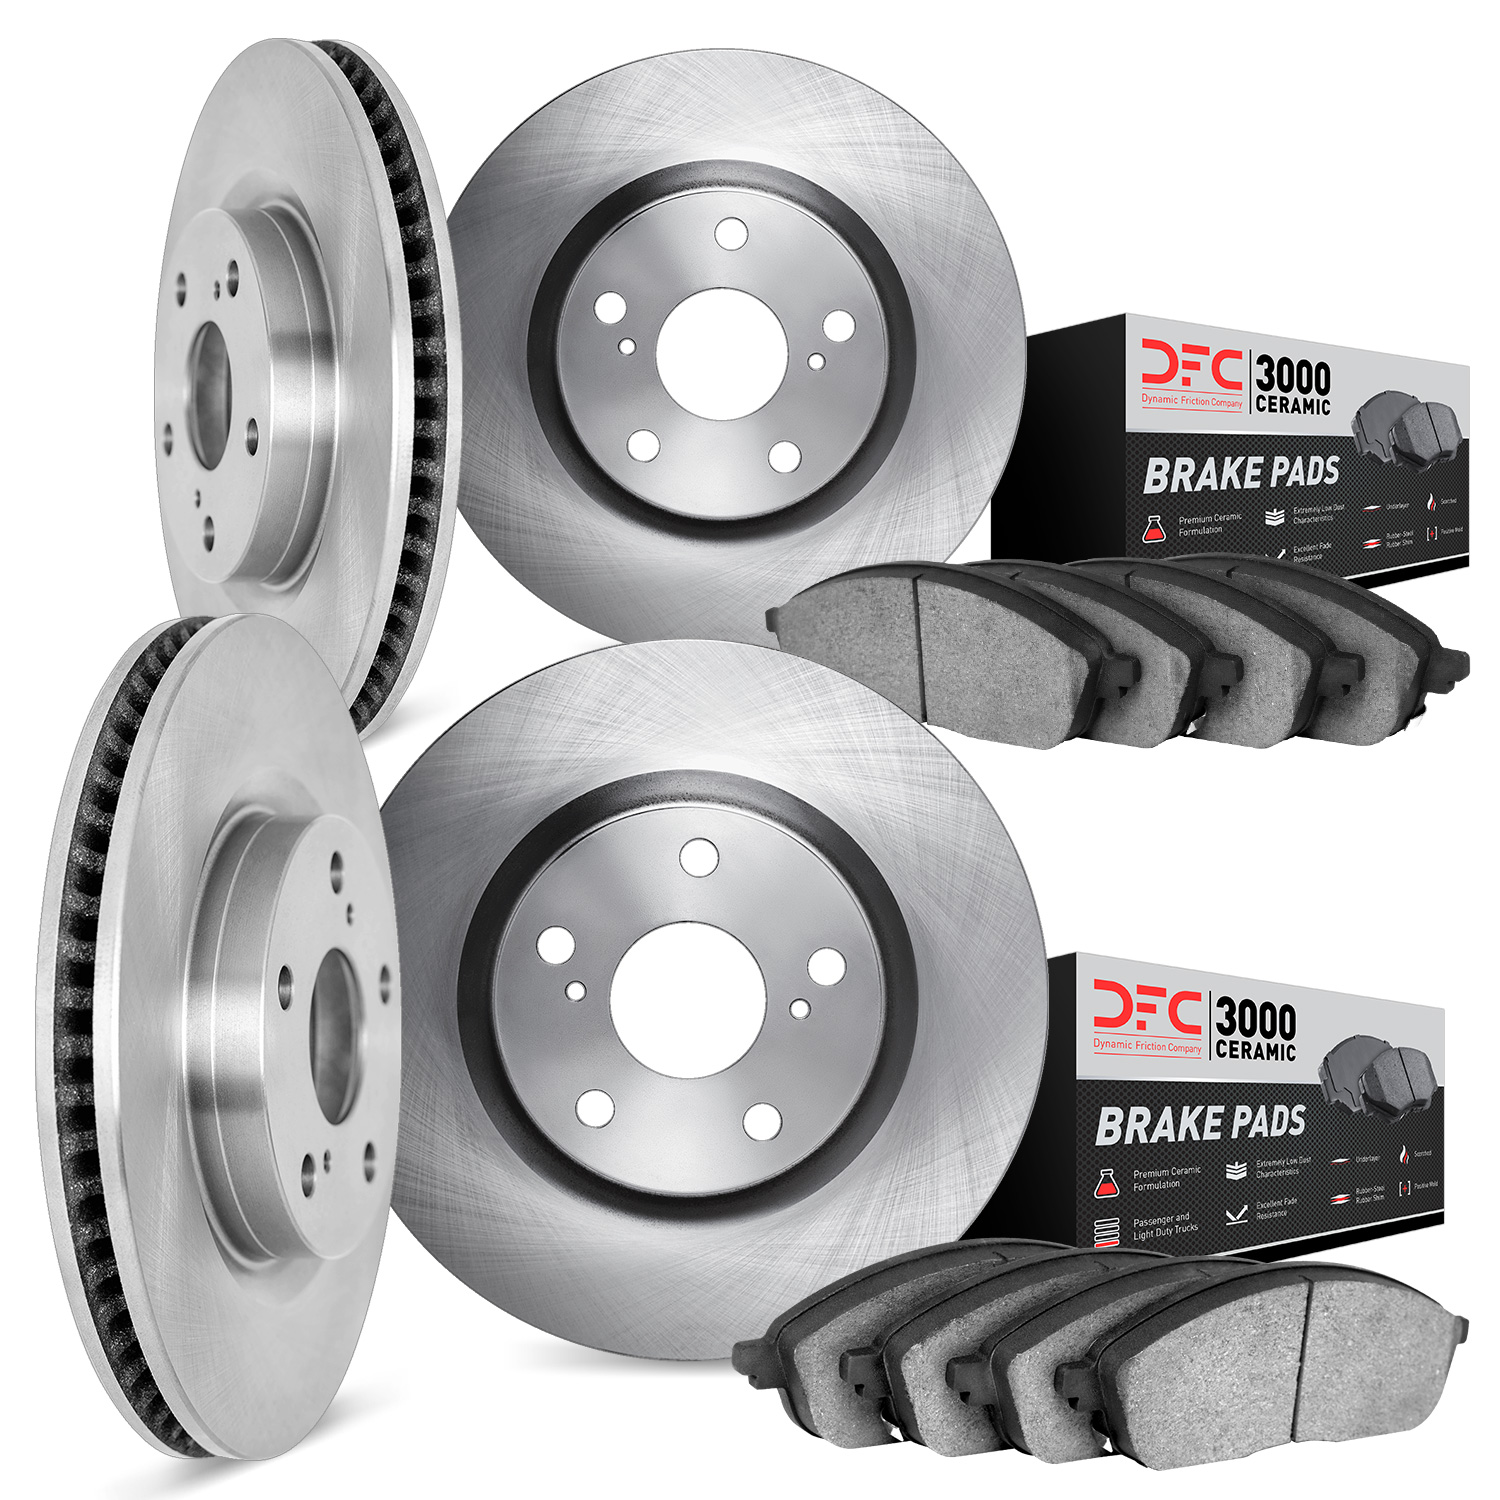 6304-56030 Brake Rotors with 3000-Series Ceramic Brake Pads Kit, 2003-2011 Ford/Lincoln/Mercury/Mazda, Position: Front and Rear